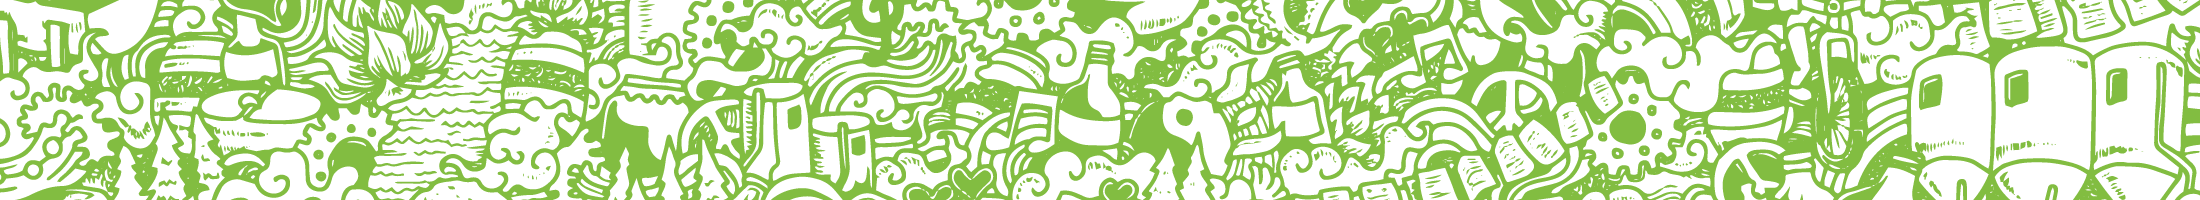 germs clipart green